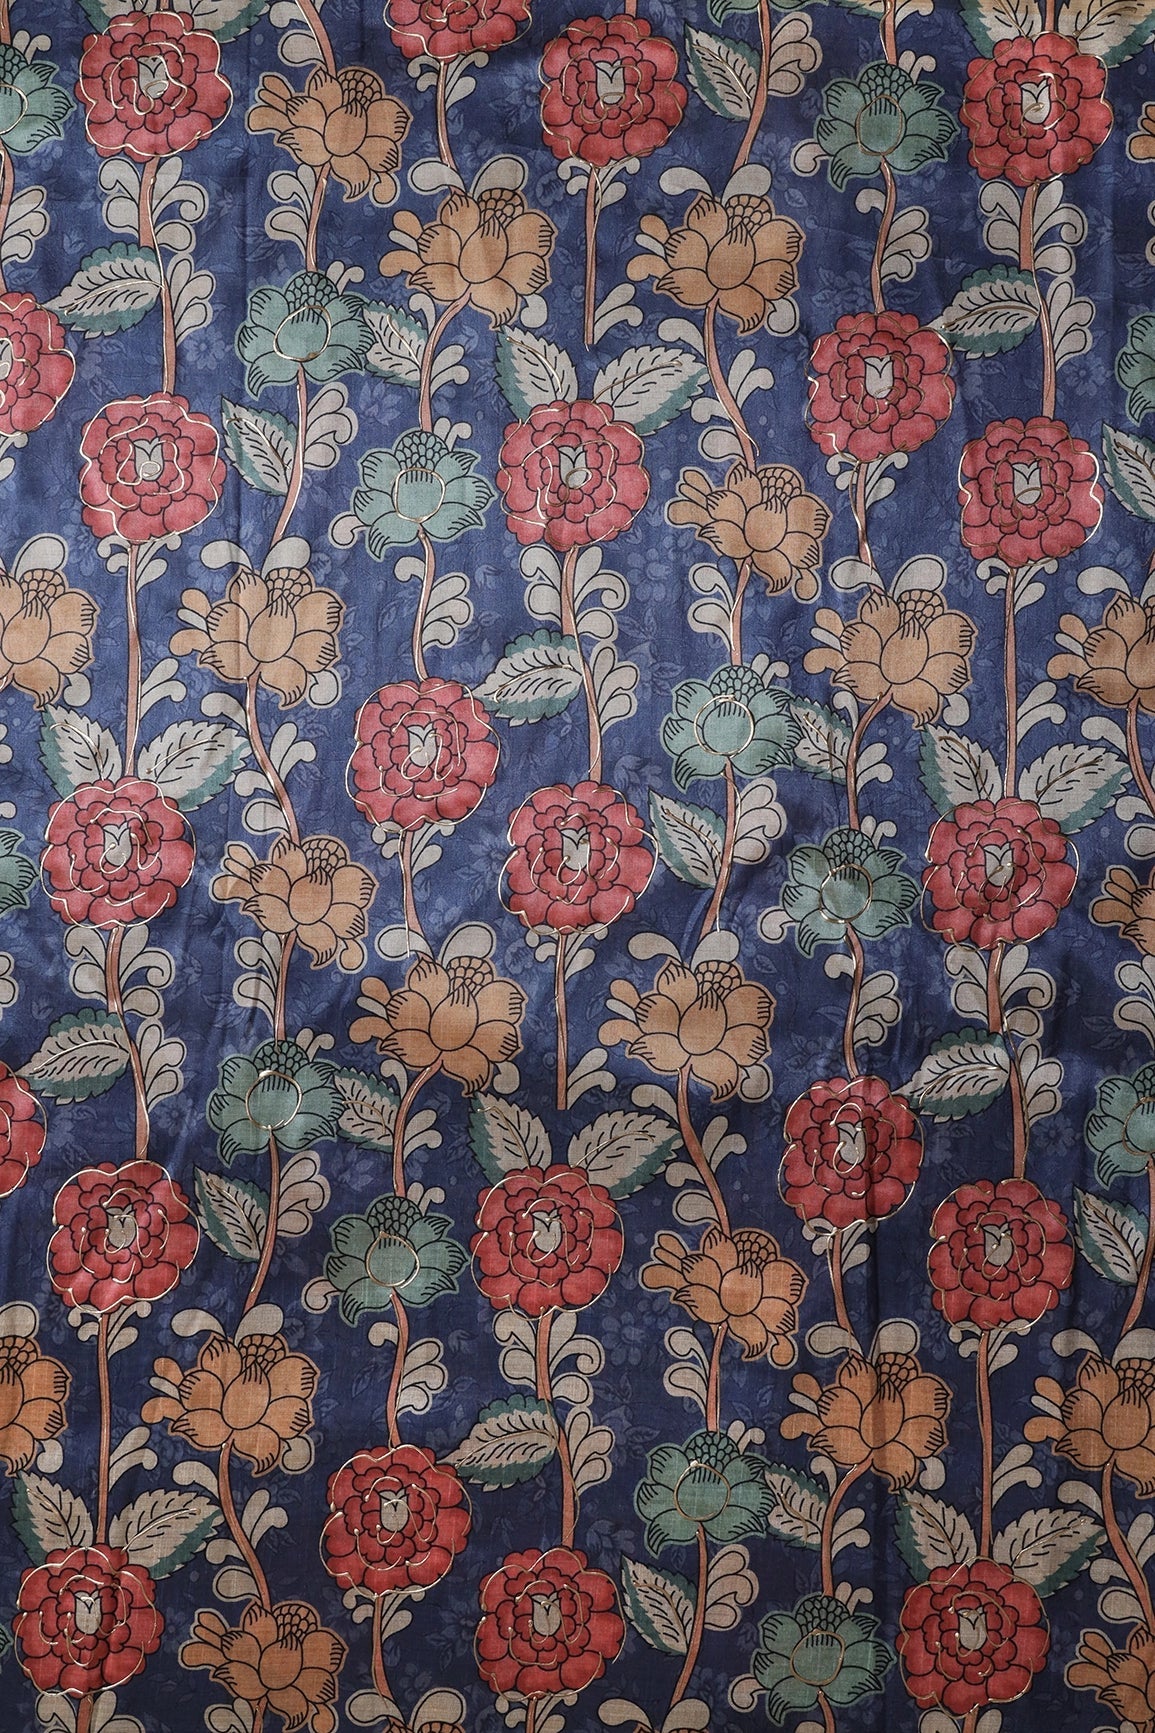 Blue And Red Floral Pattern Digital Foil Print On Mulberry Silk Fabric - doeraa